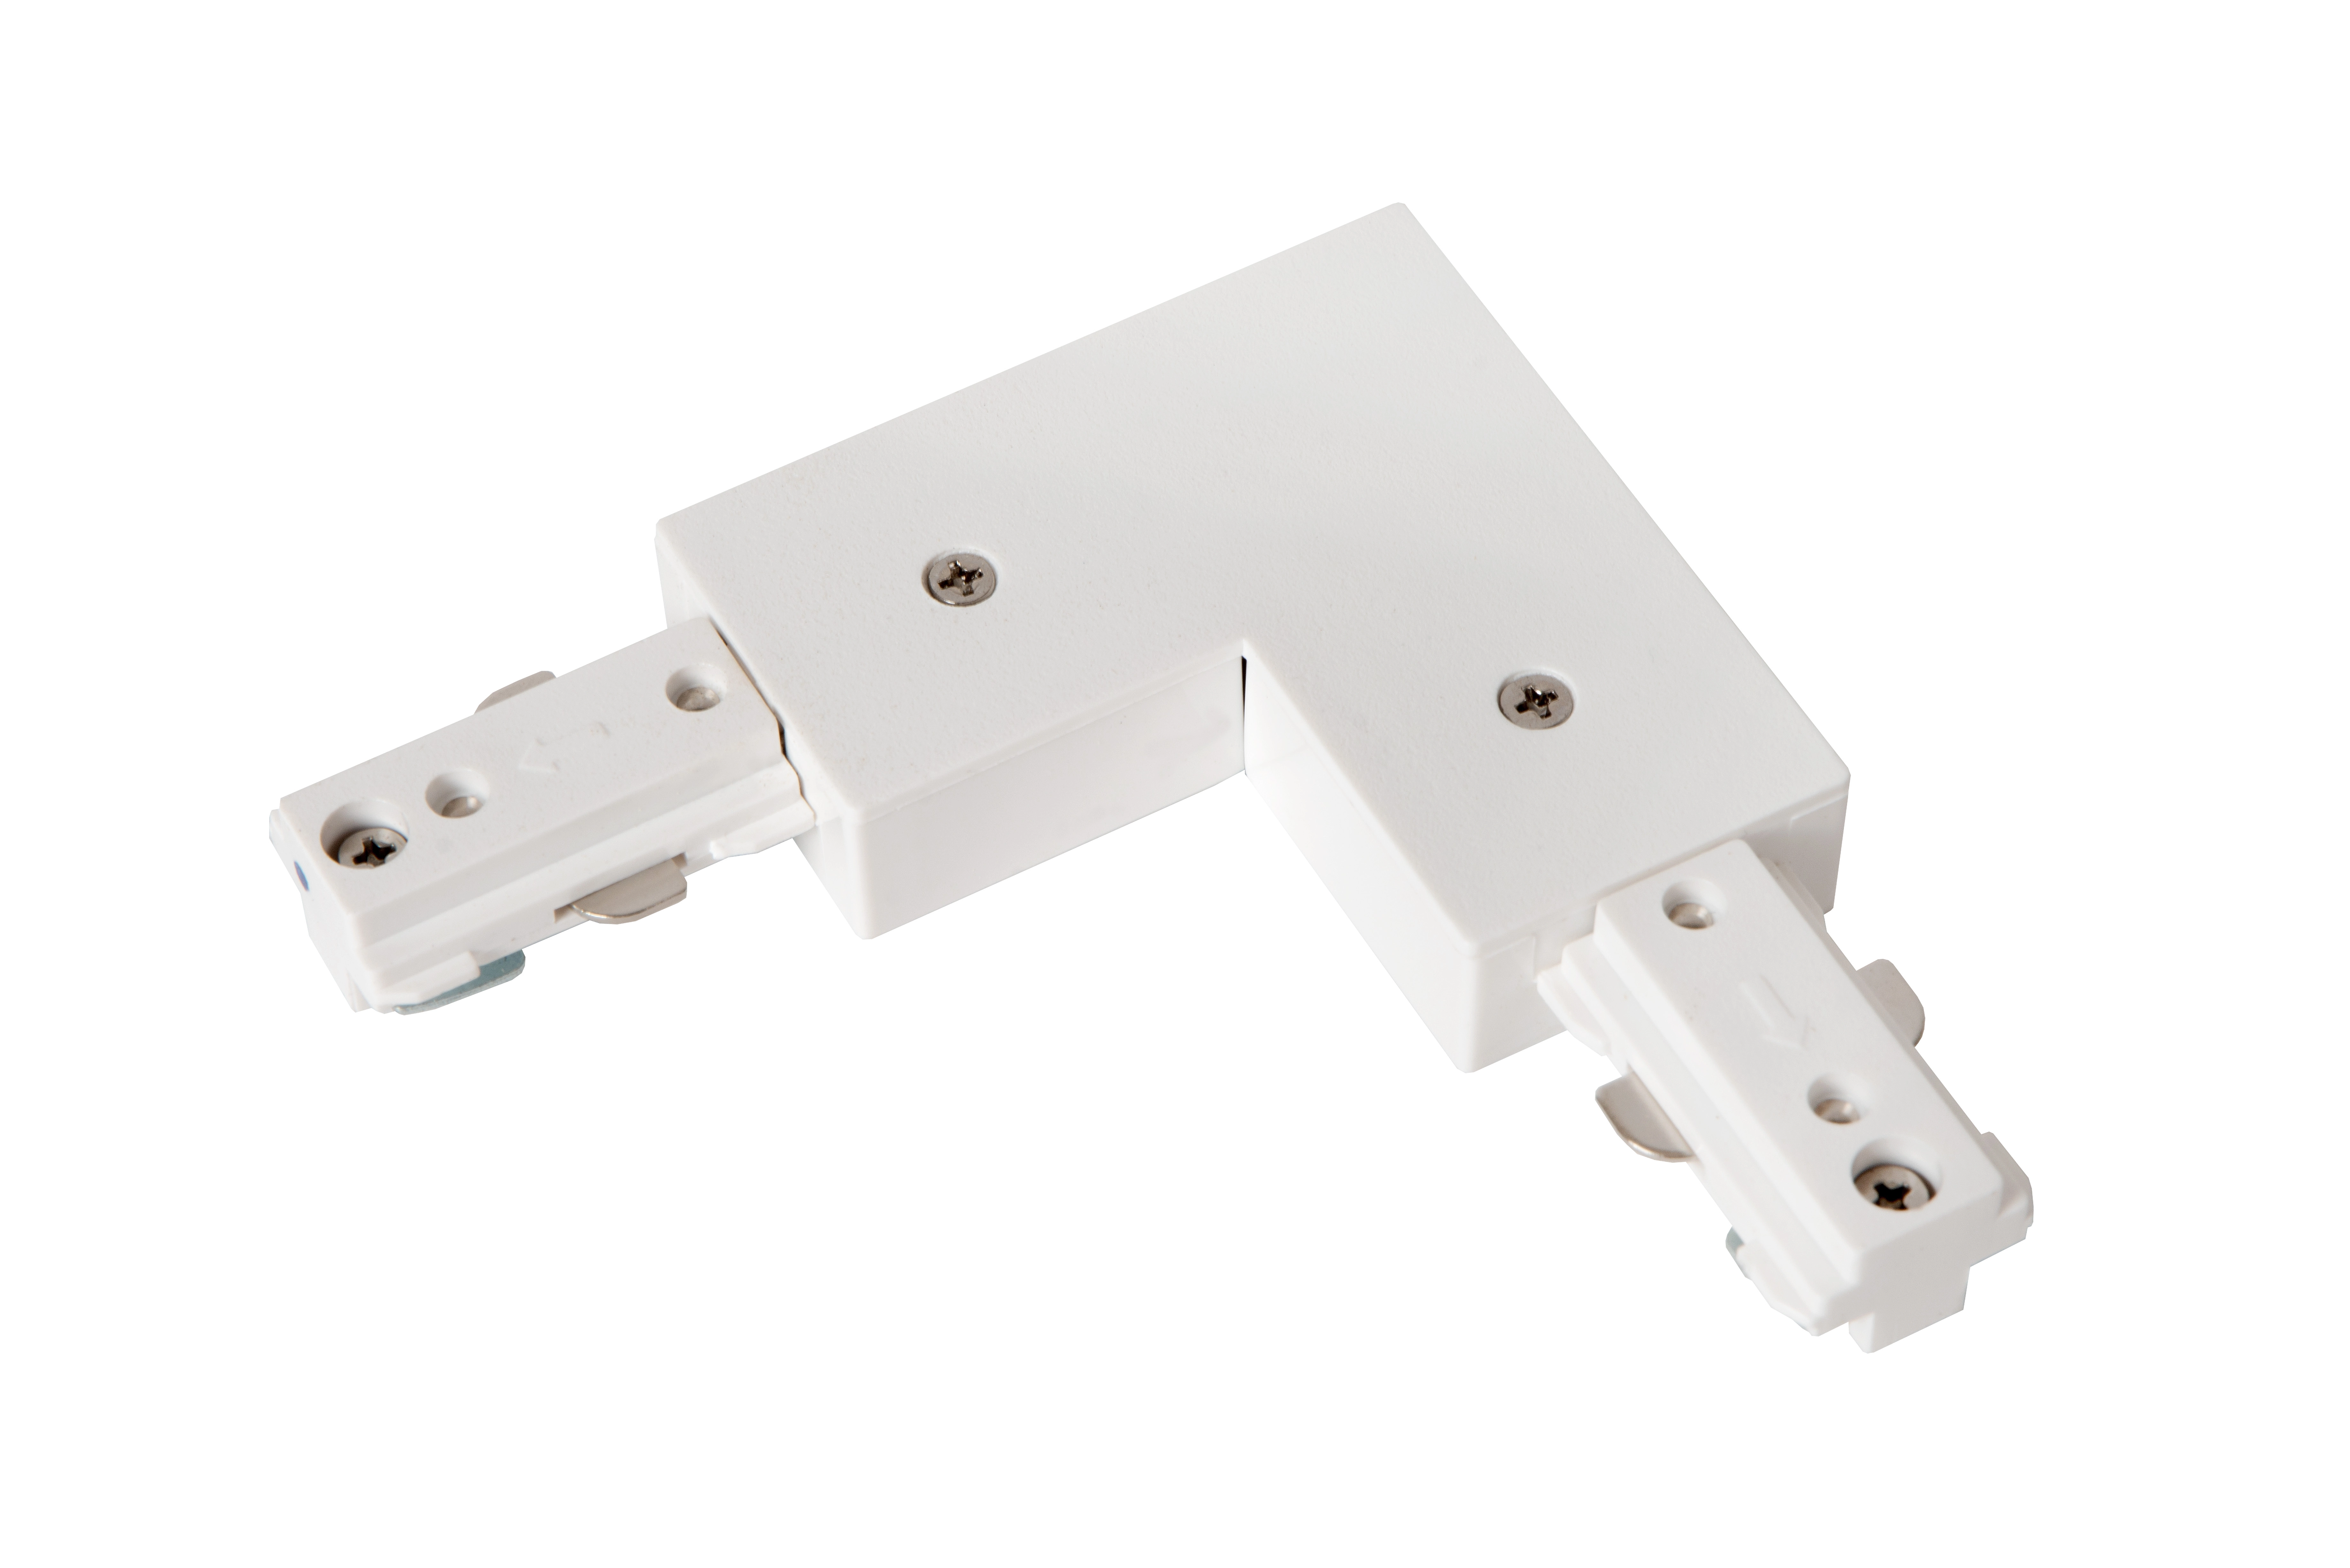 LU 09950/05/31 Lucide TRACK L-connector - 1-circuit Track lighting system - Left - White (Extension)